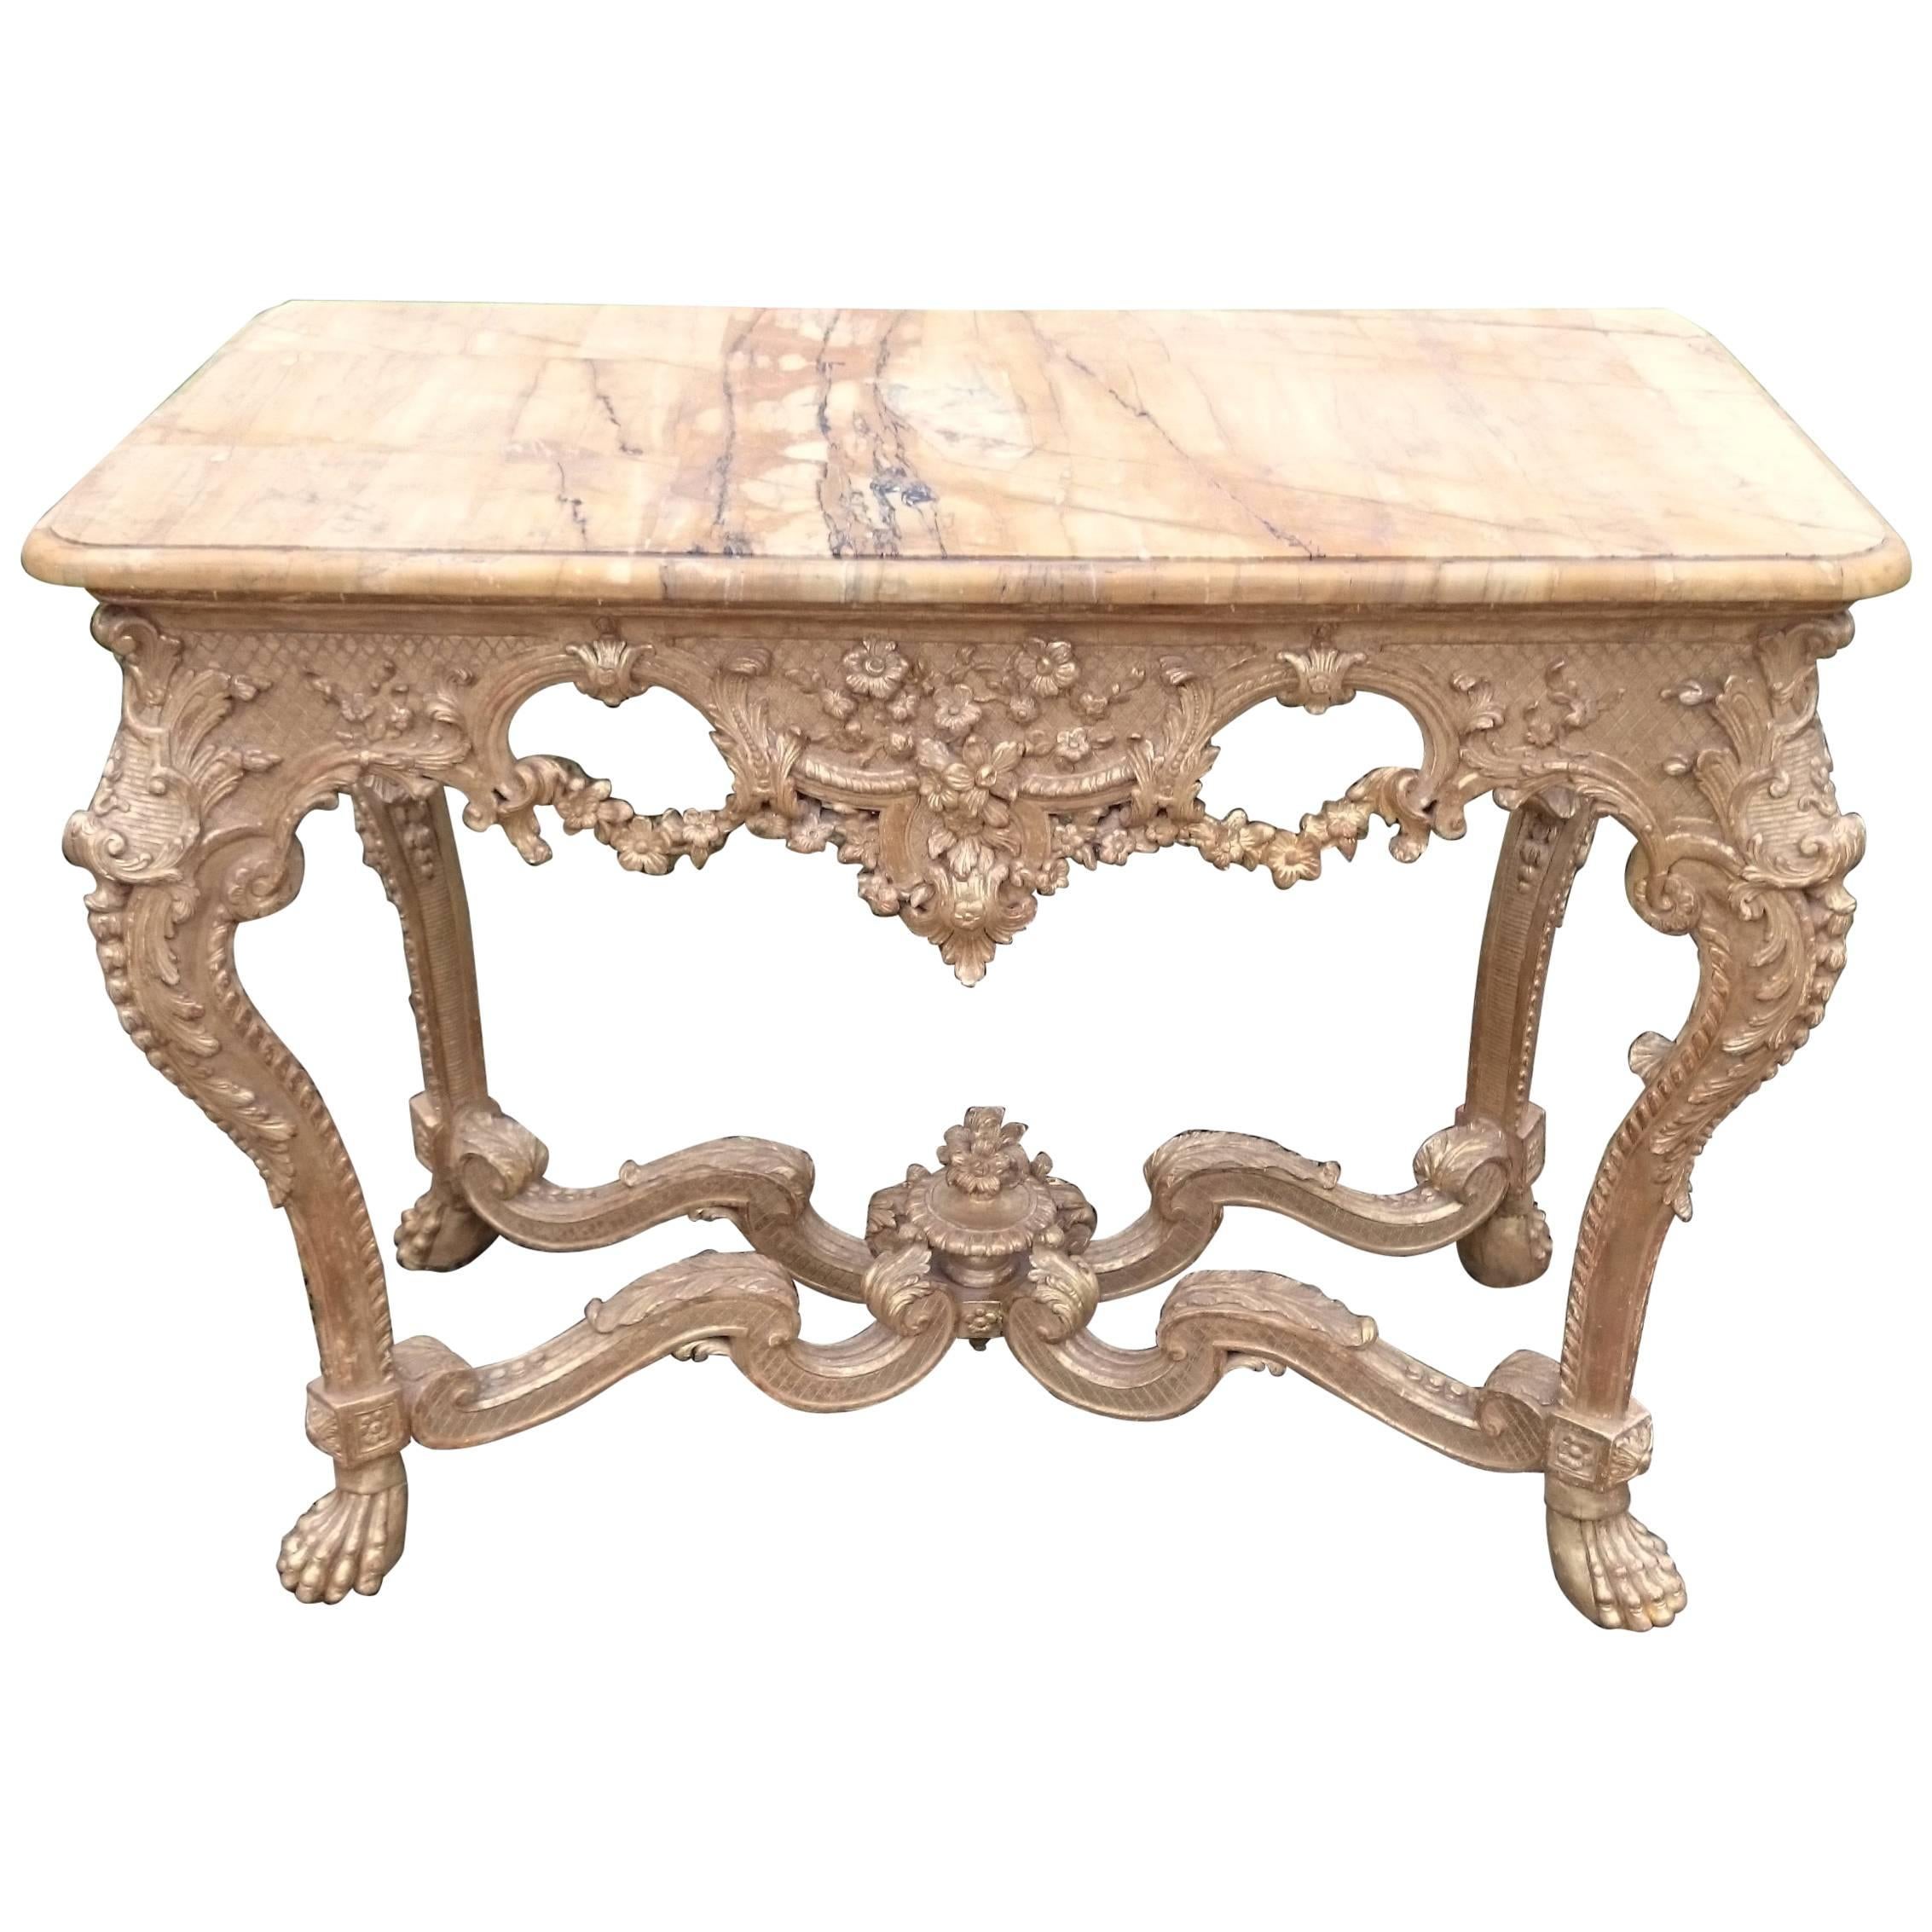 18th Century, George II Period Gilt Console Table with Marble Top